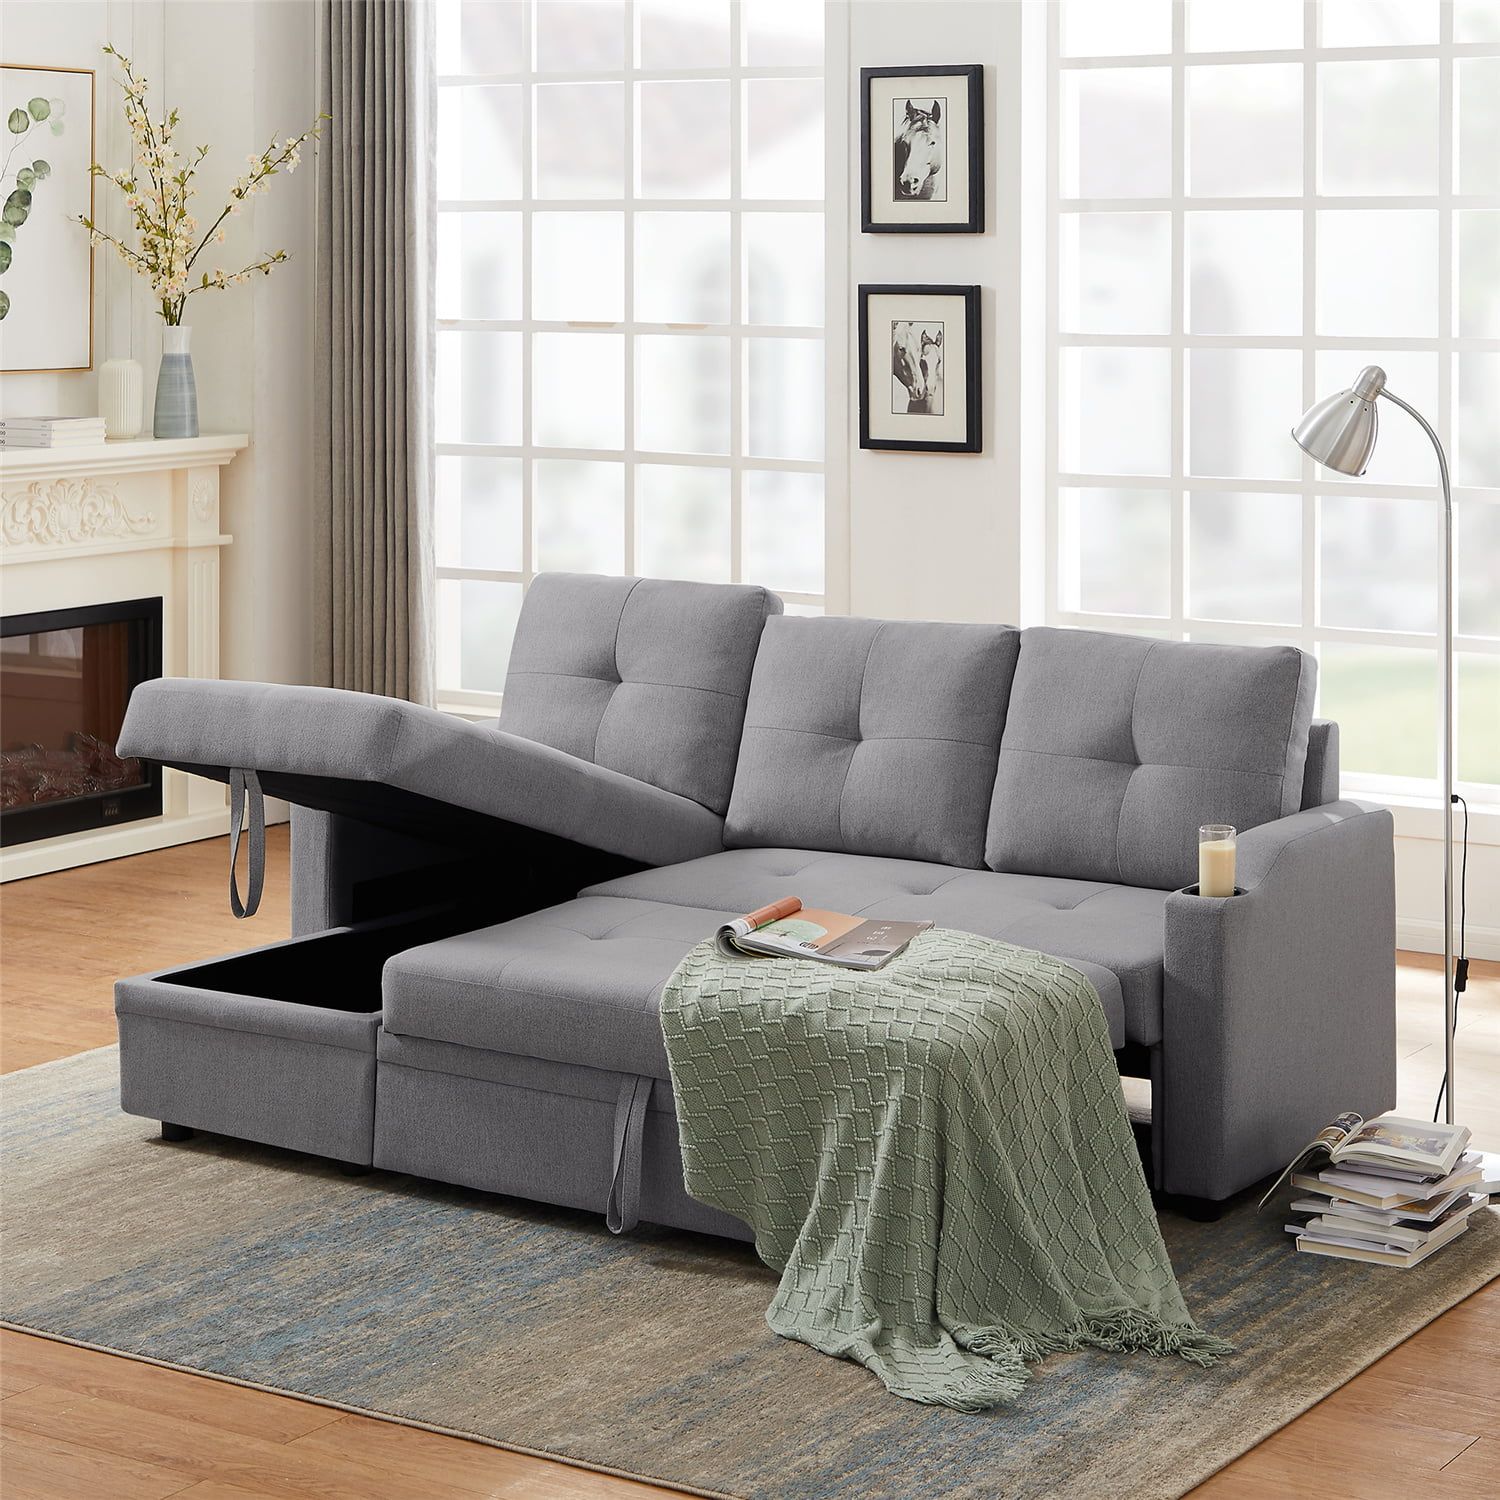 81" Sleeper Sectional Sofa Couch With Pull Out Sleeper And Reversible  Storage Chaise Lounge, Convertible Corner Sofa Couch With Two Cup Holders  For Living Room, Gray – Walmart Inside Sectional Sofa With Storage (Gallery 6 of 20)